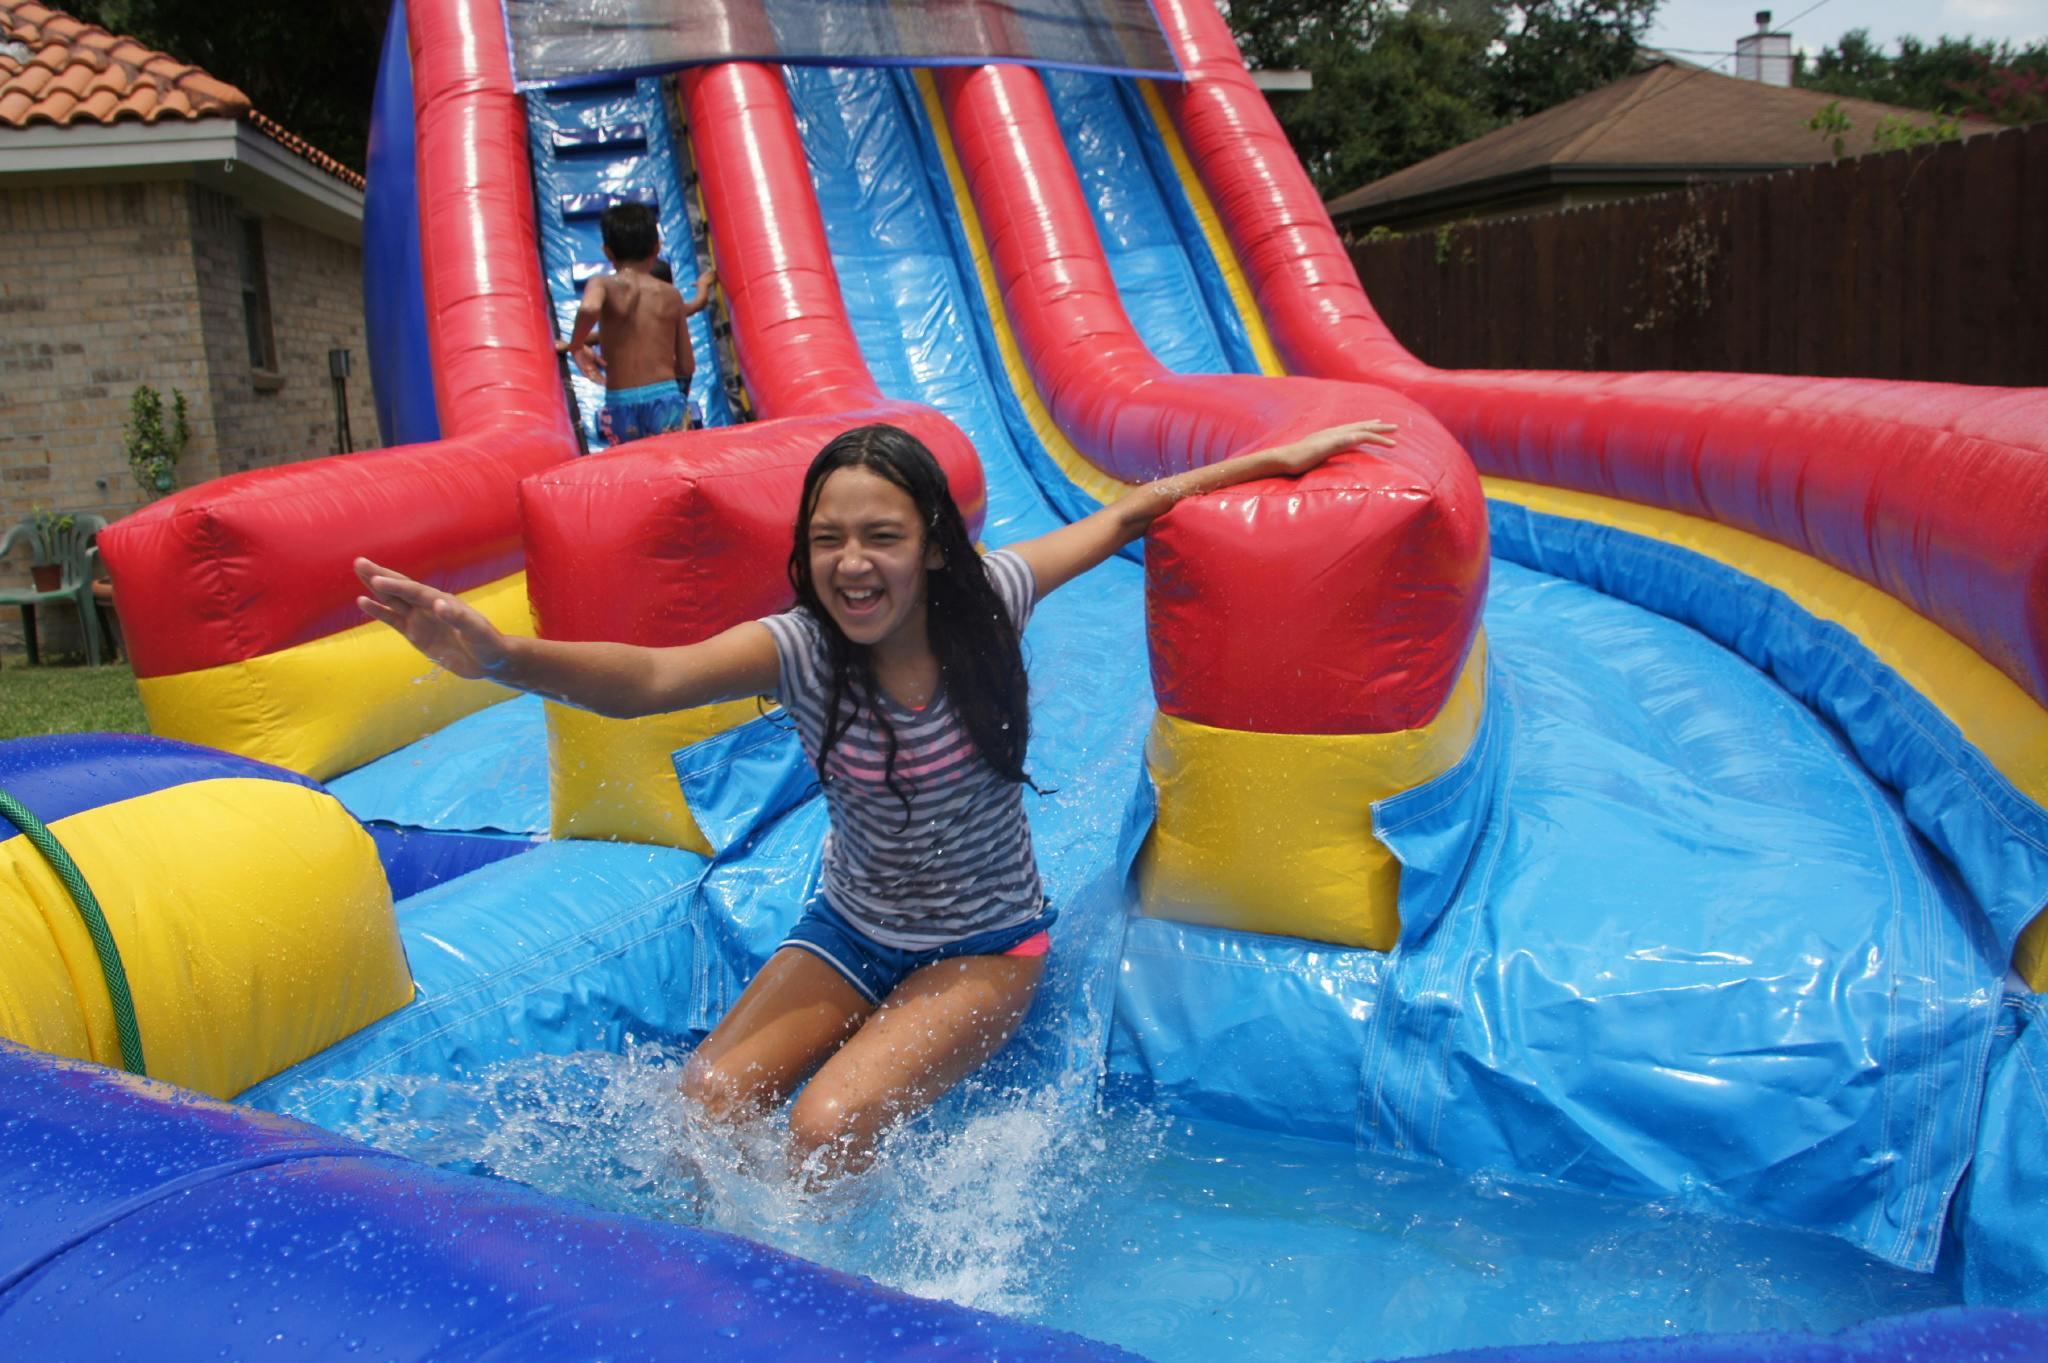 7 Water Slides That Will Turn Your Backyard Into A Water Park